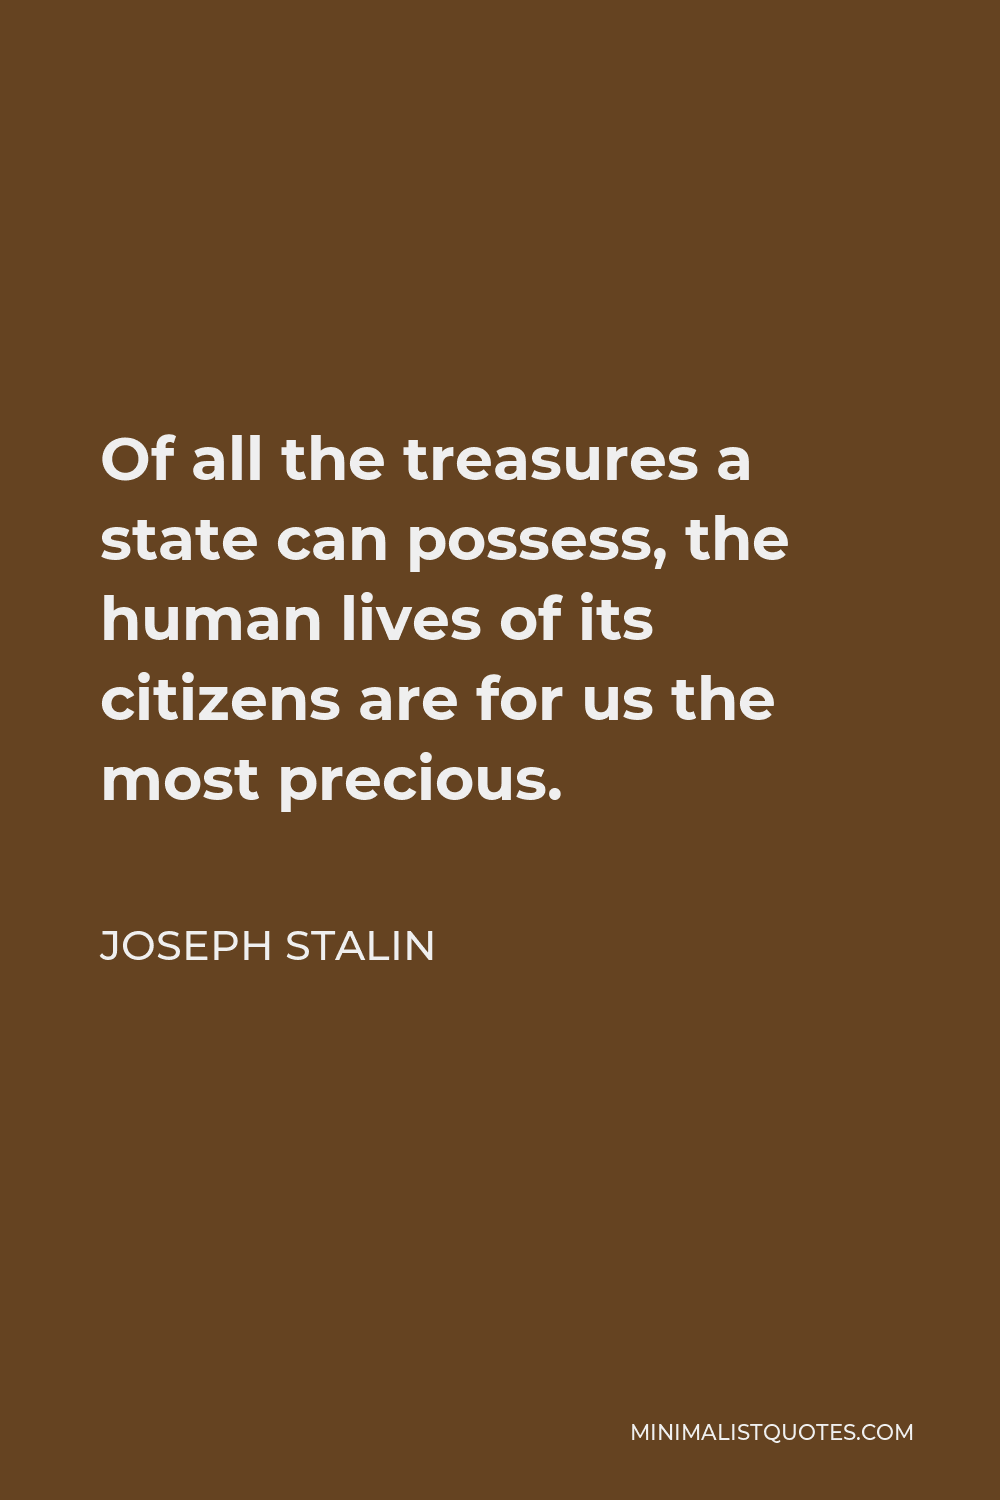 Joseph Stalin Quote - Of all the treasures a state can possess, the human lives of its citizens are for us the most precious.